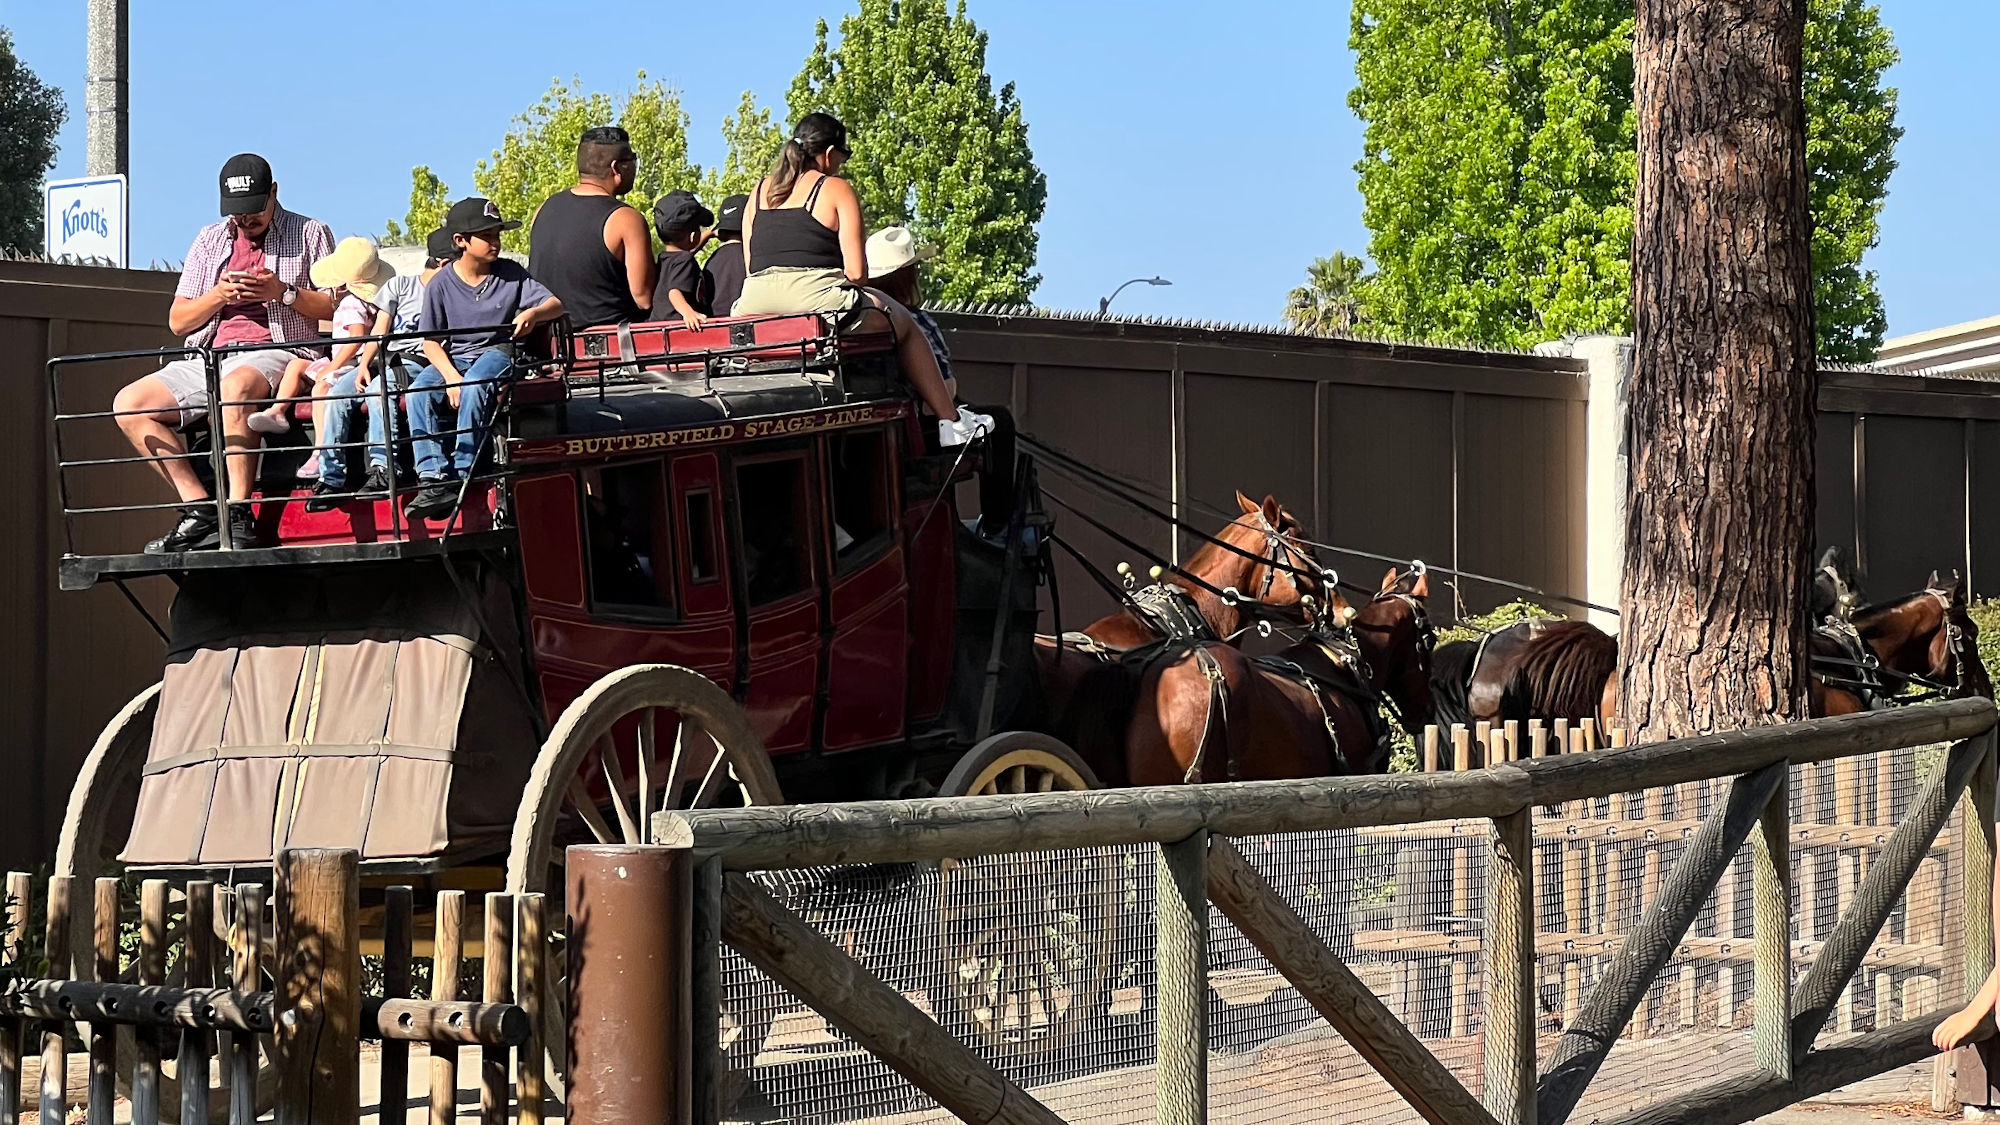 Butterfield Stagecoach going by Pig Pen's Mud Buggies